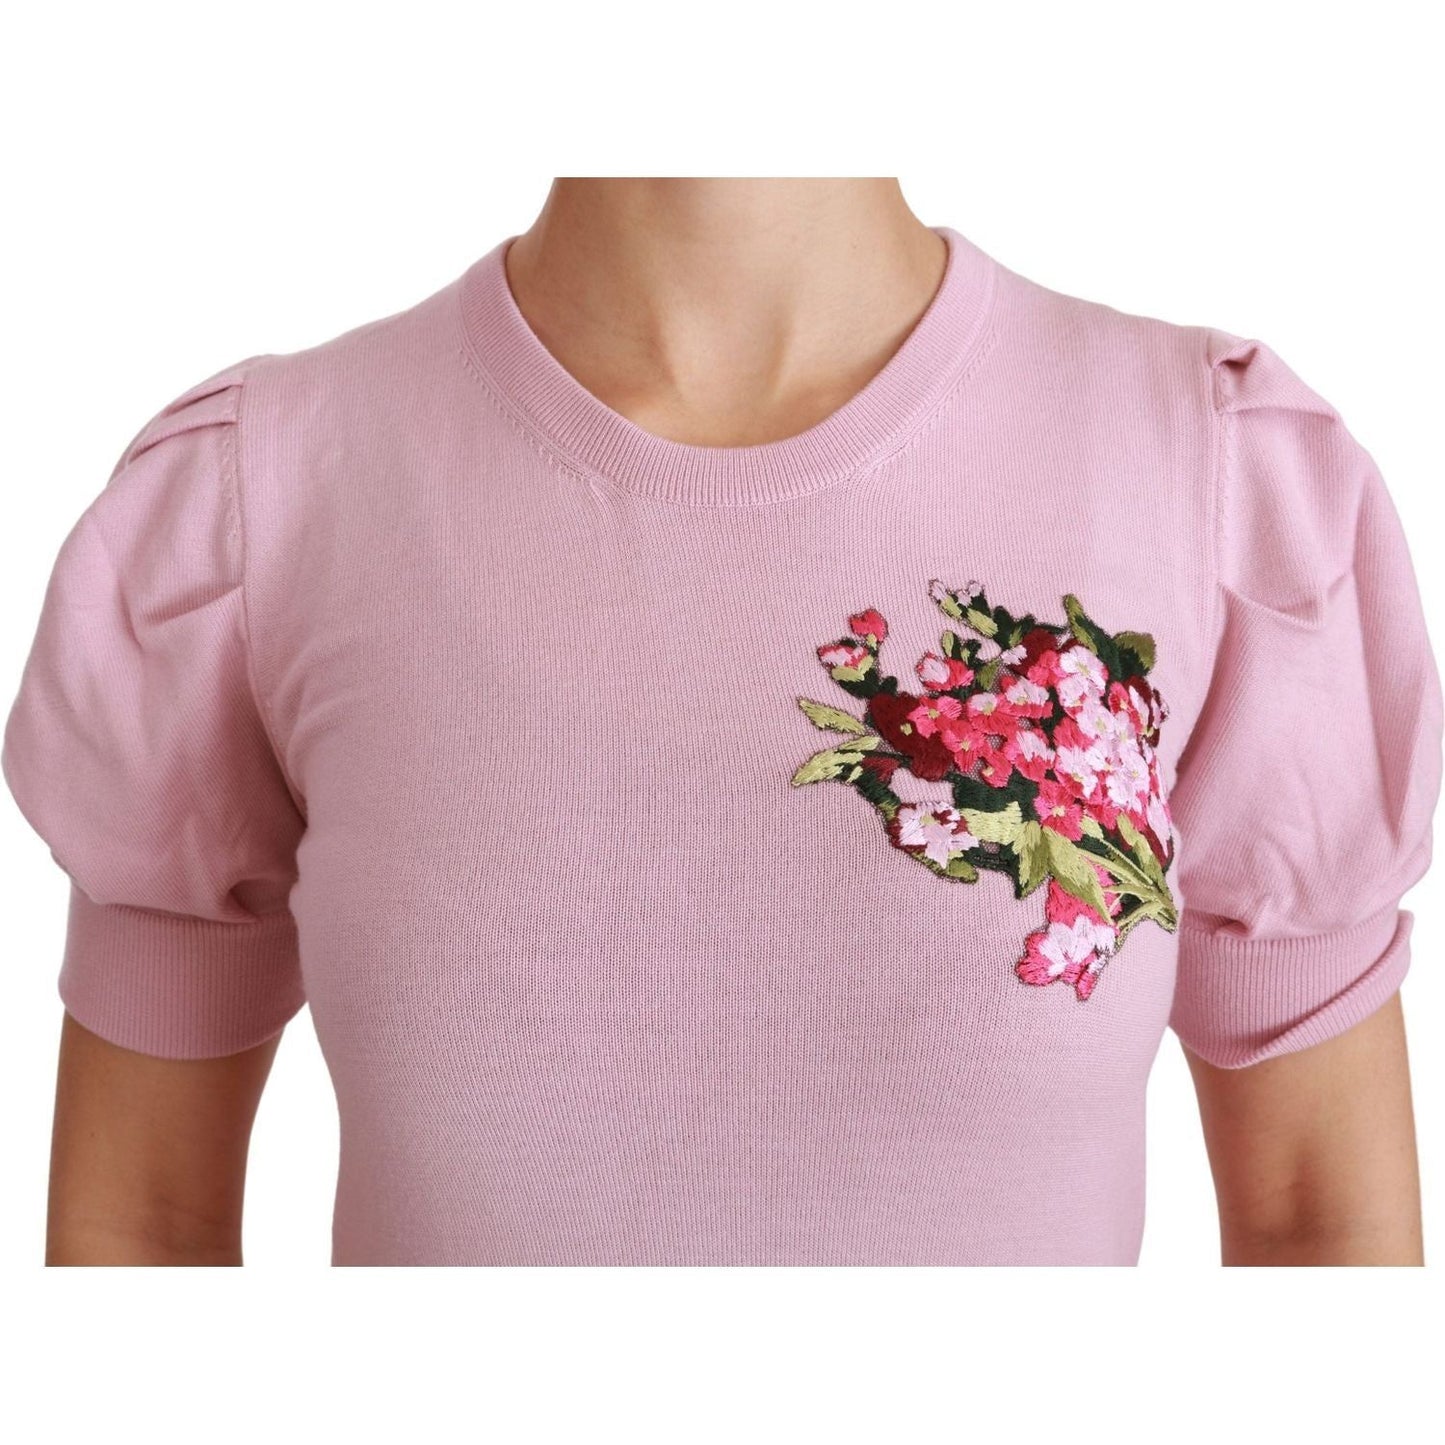 Dolce & Gabbana Elegant Embroidered Virgin Wool Blouse pink-floral-embroidered-blouse-wool-top